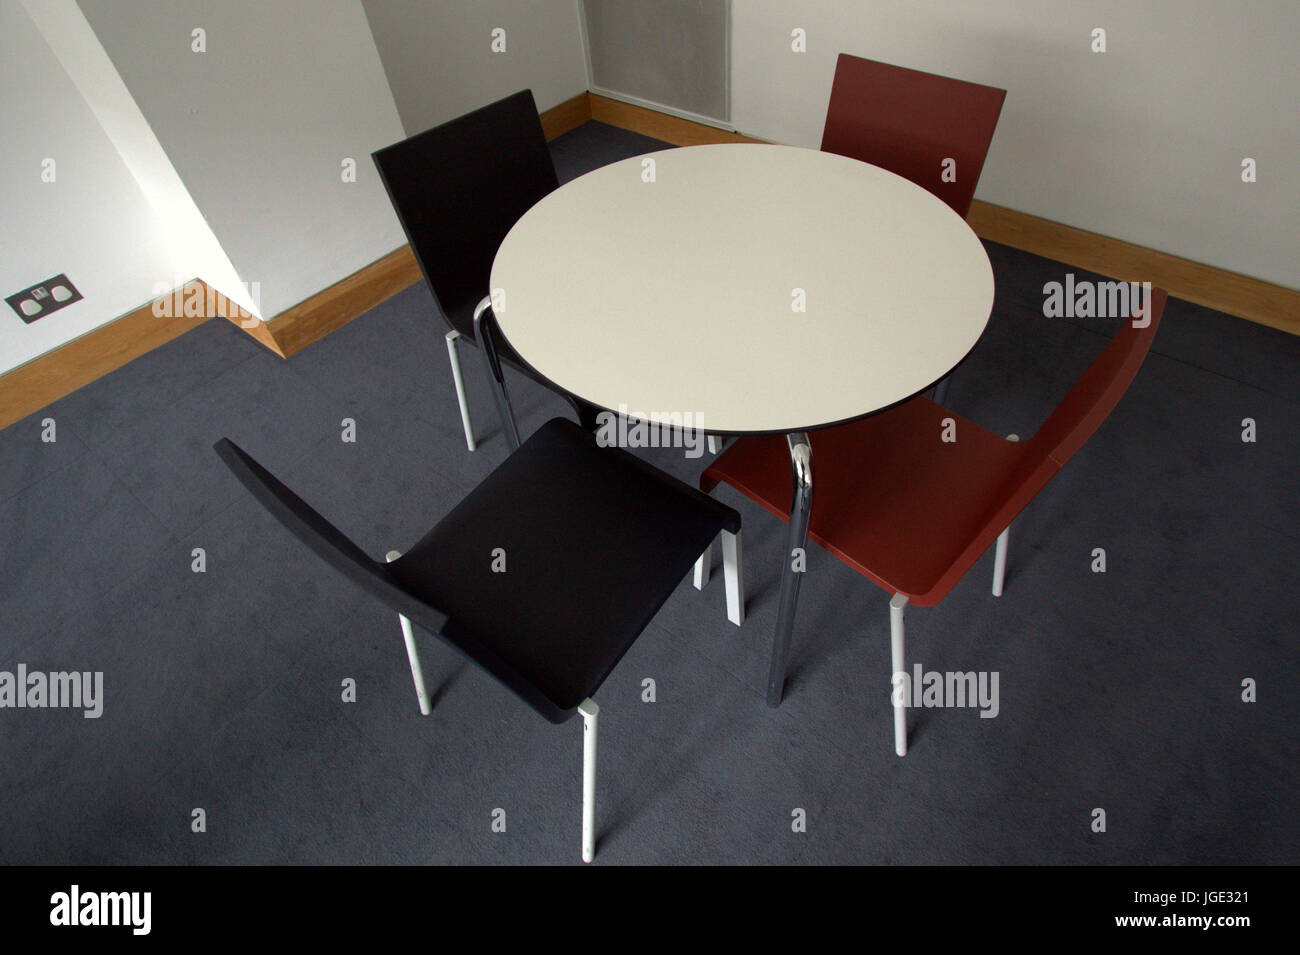 empty nobody business meeting table with four chairs in basic conference room Stock Photo